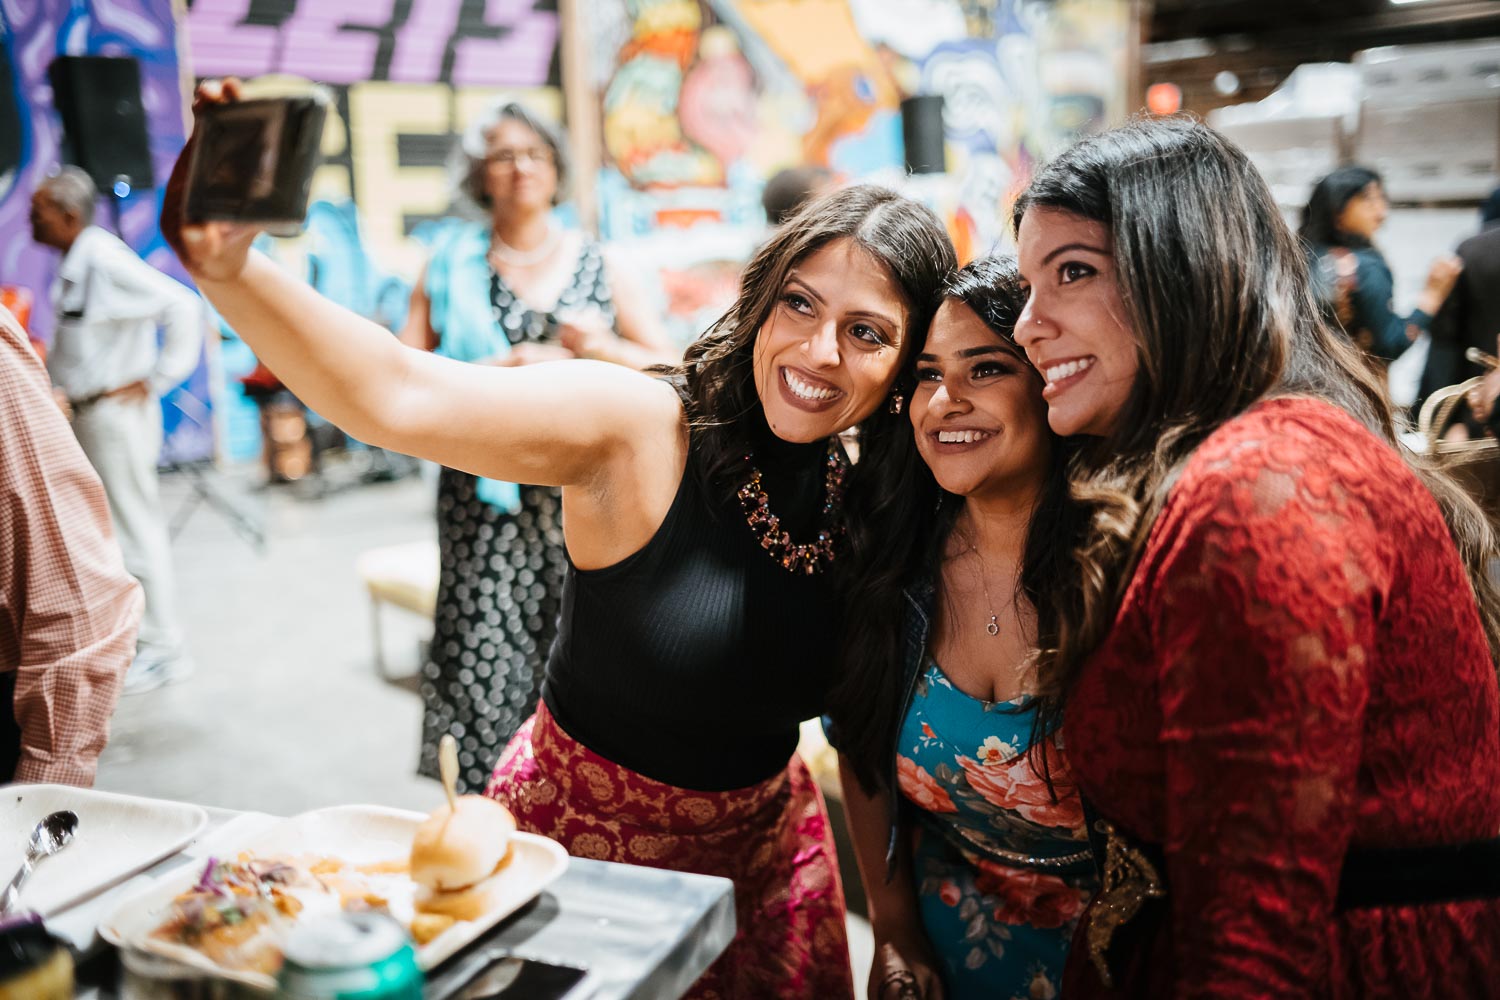 The bride on the left poses for slefies at The Infinite Monkey Theorem